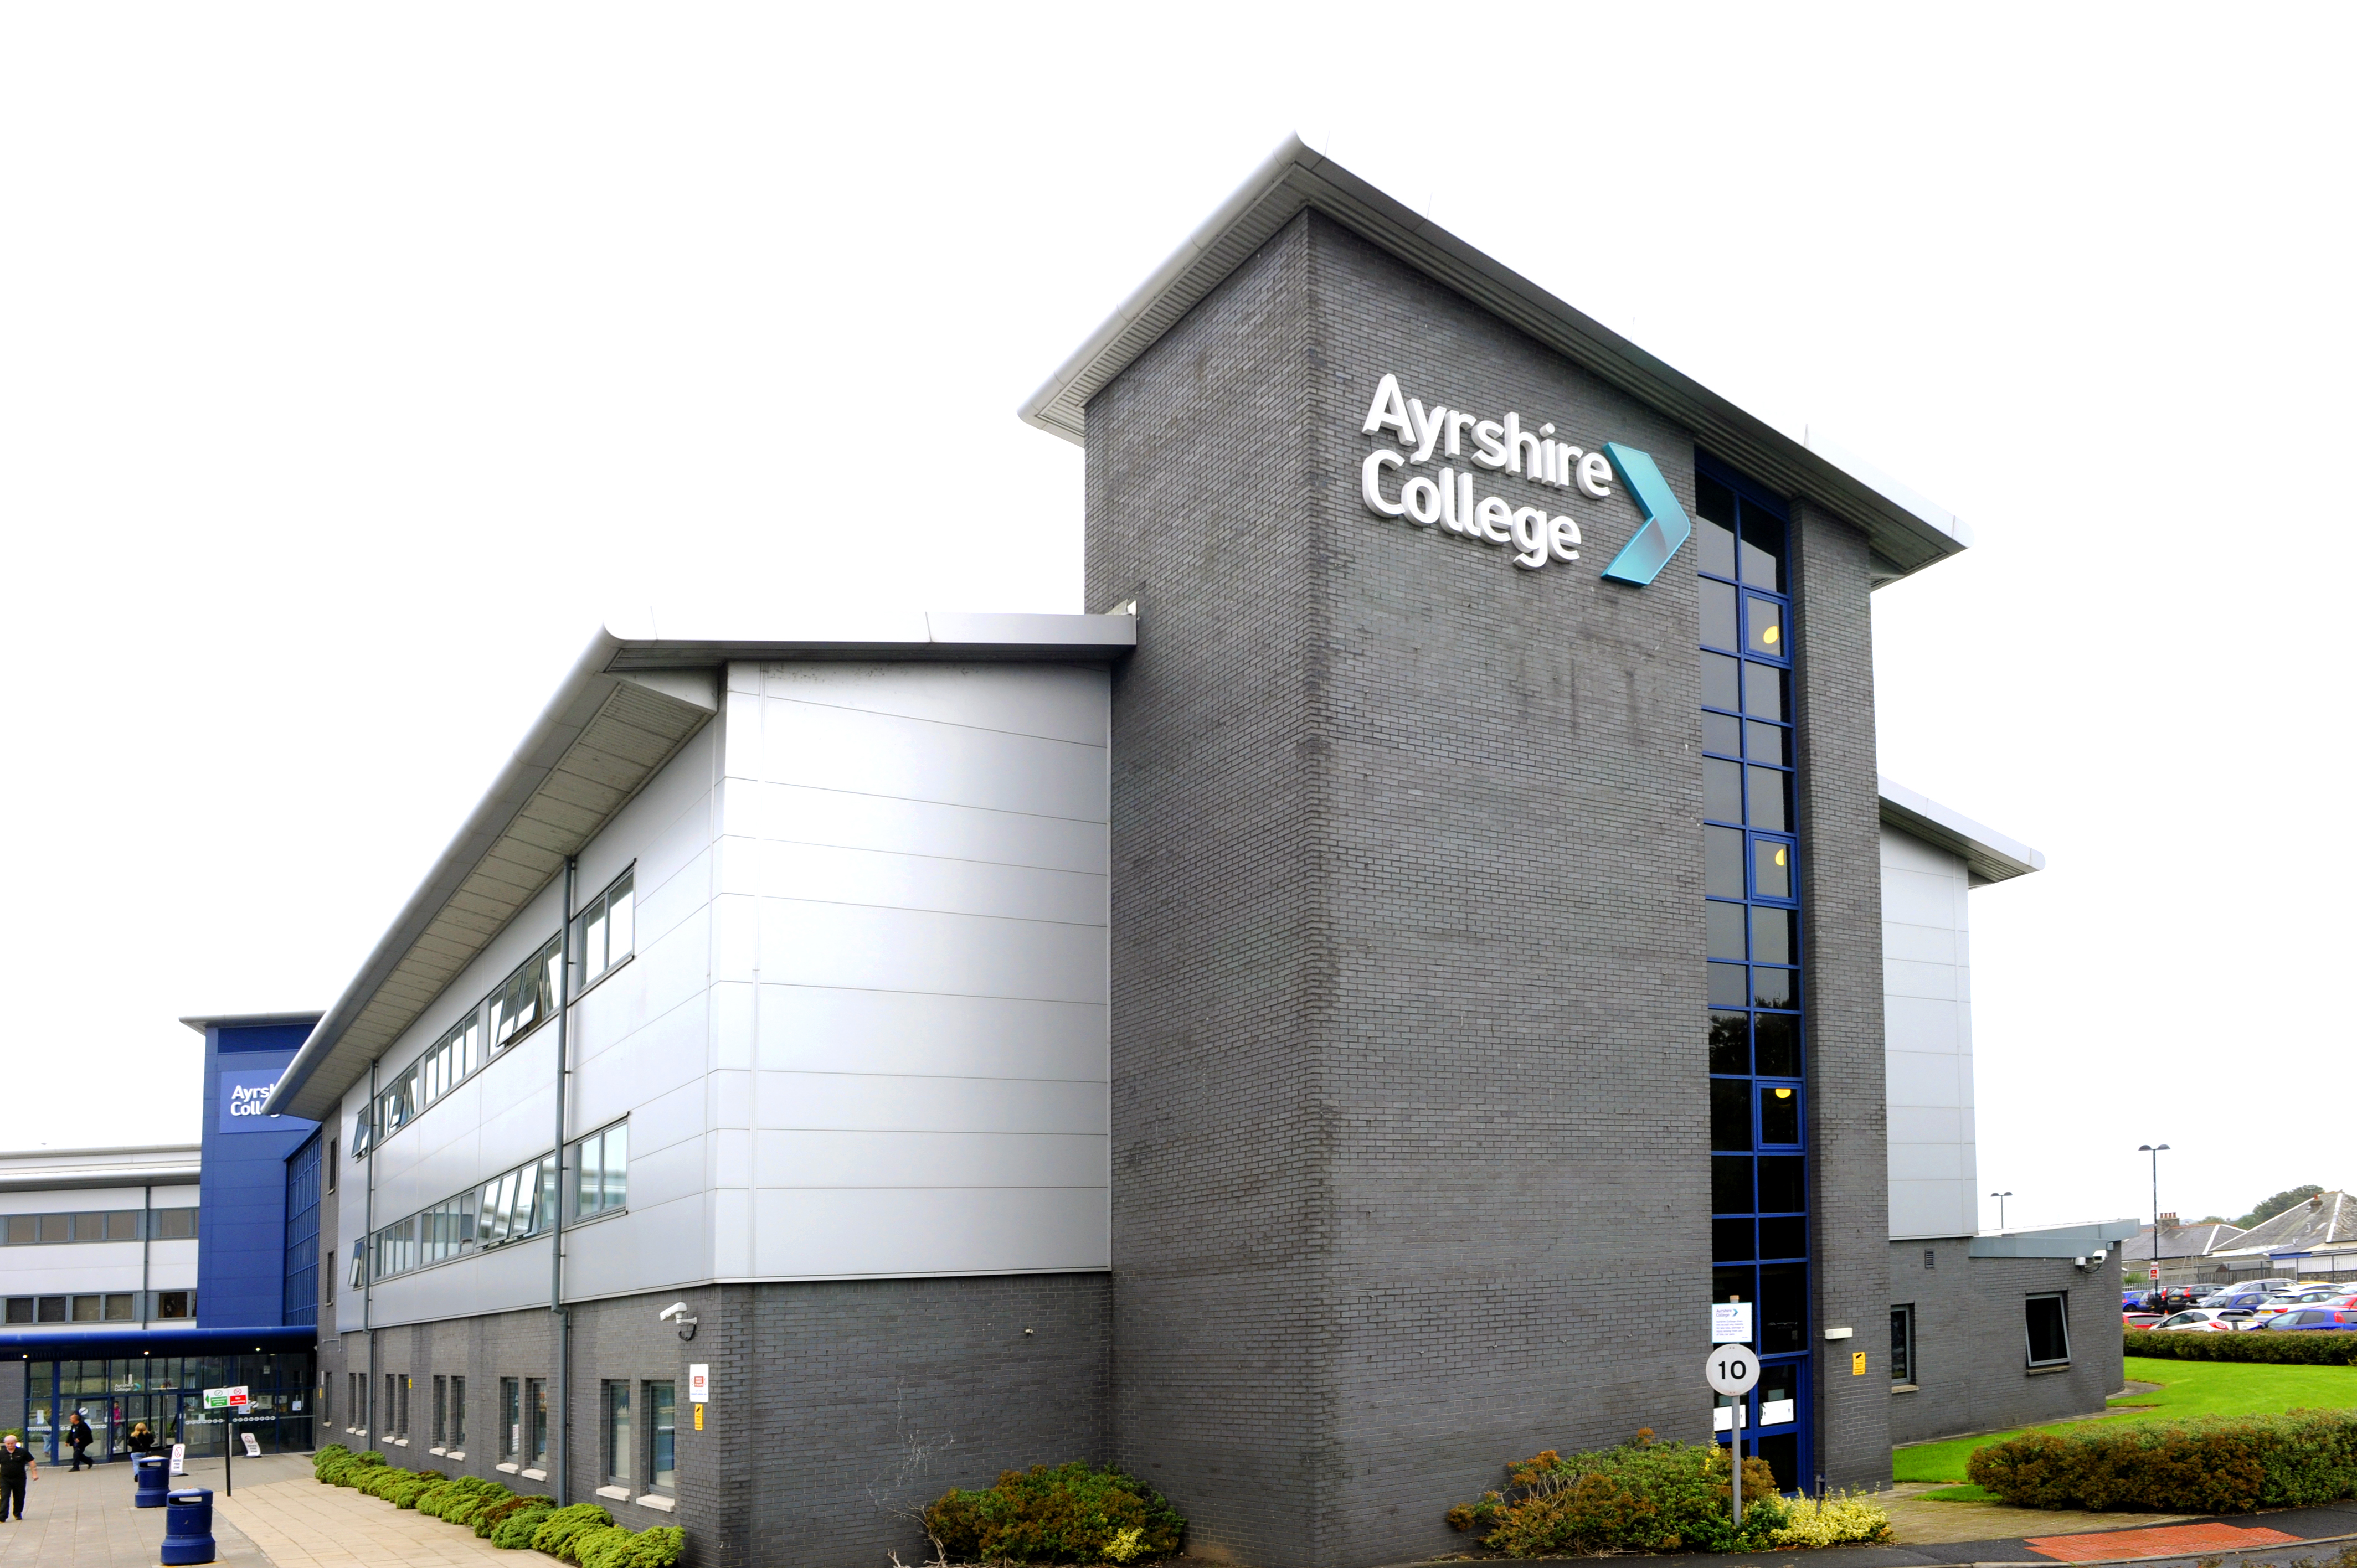 Side view of the Ayrshire College Kilwinning Campus with Ayrshire College logo